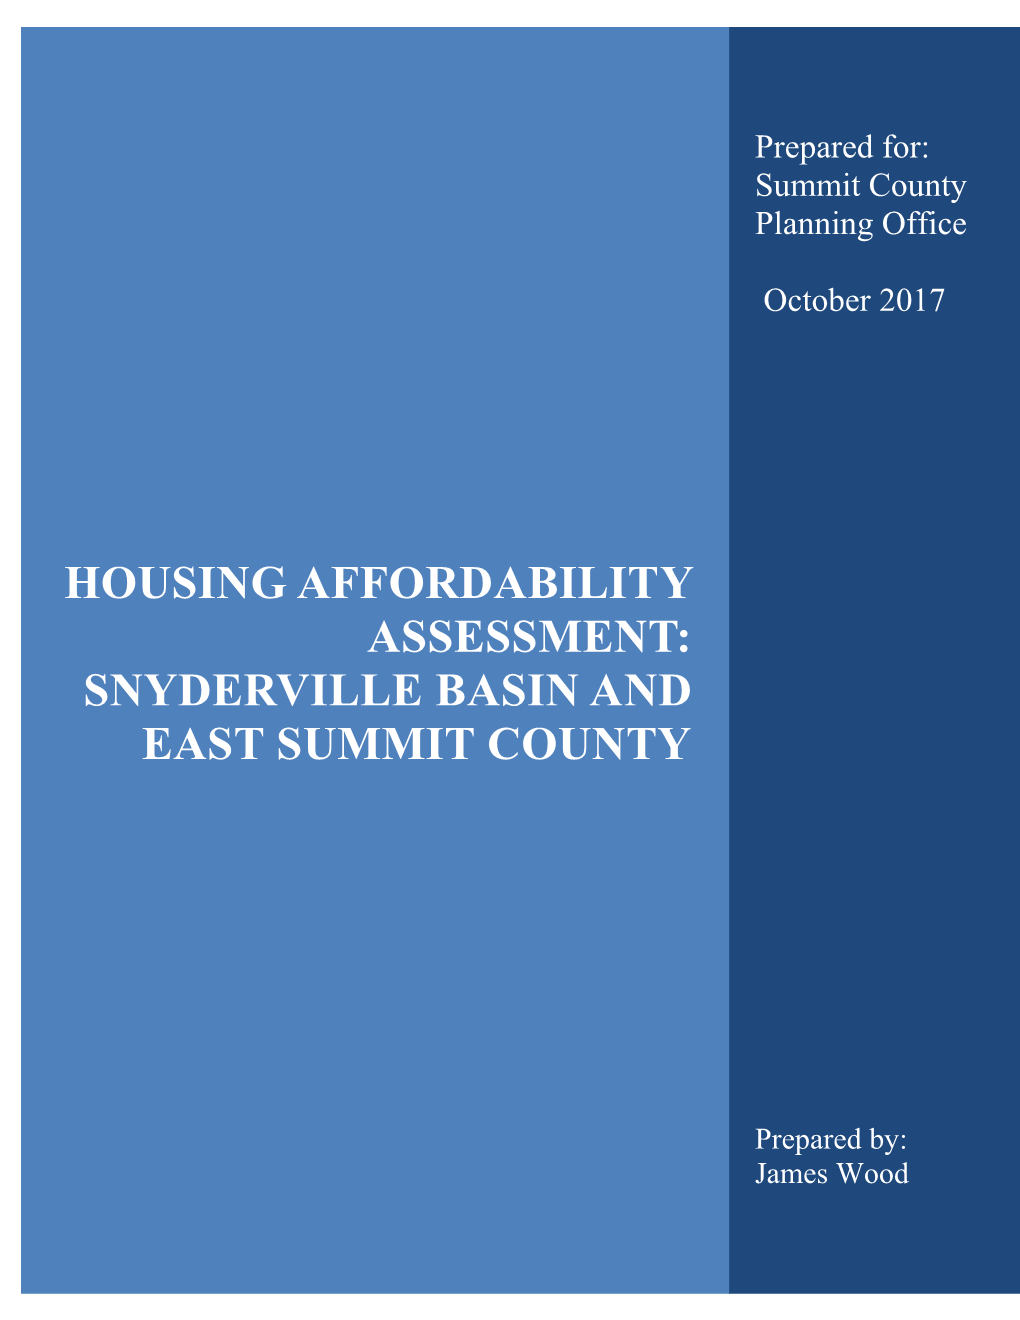 Housing Affordability Assessment: Snyderville Basin and East Summit County